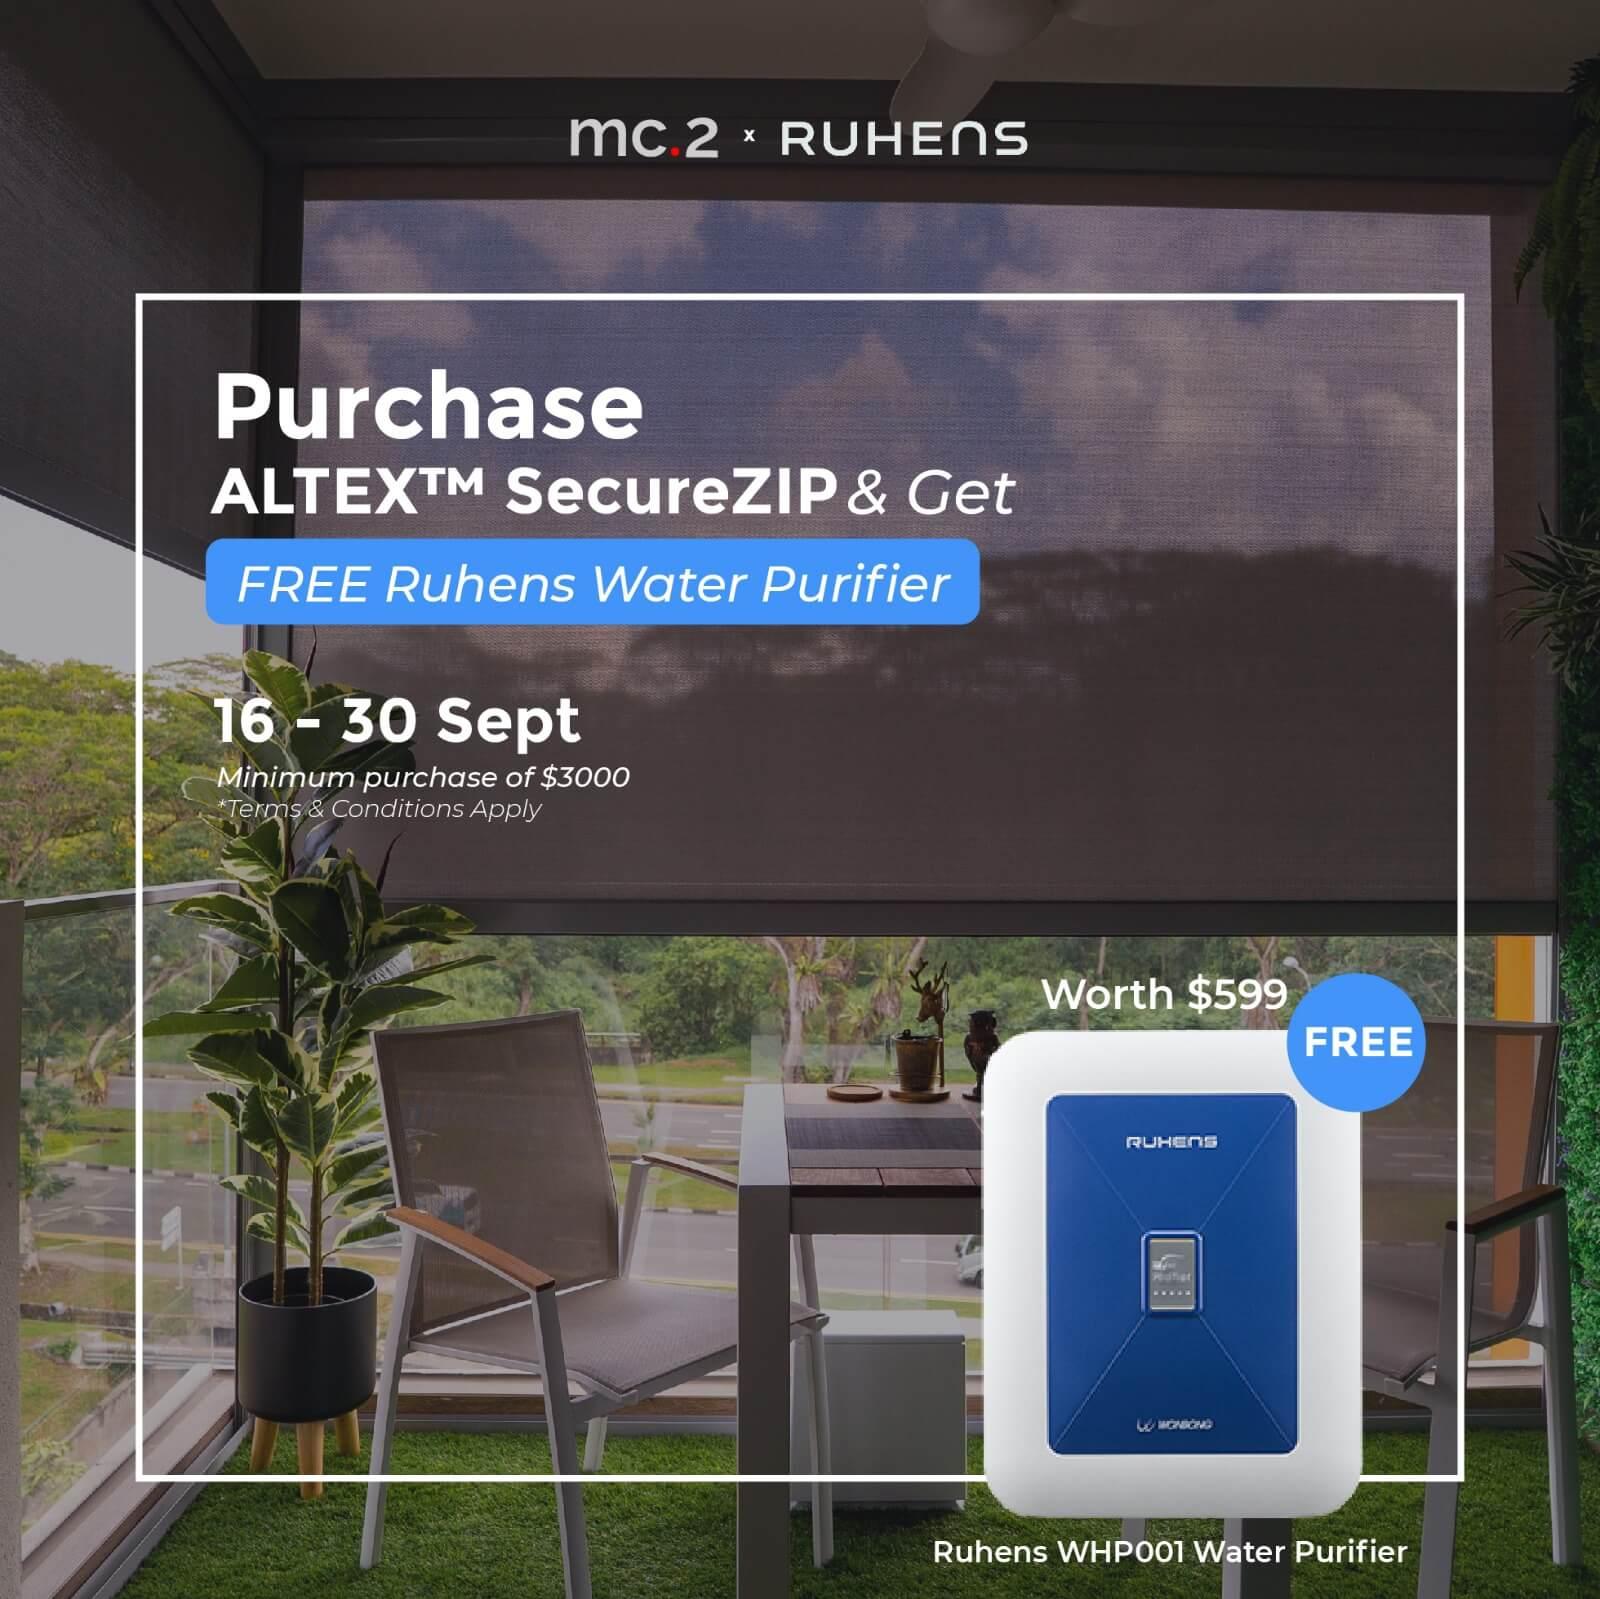 Get FREE Ruhens Water Purifier Worth $599 With Minimum Spending of $3,000 for ALTEX™ SecureZIP From Now to 30 Sep 2020